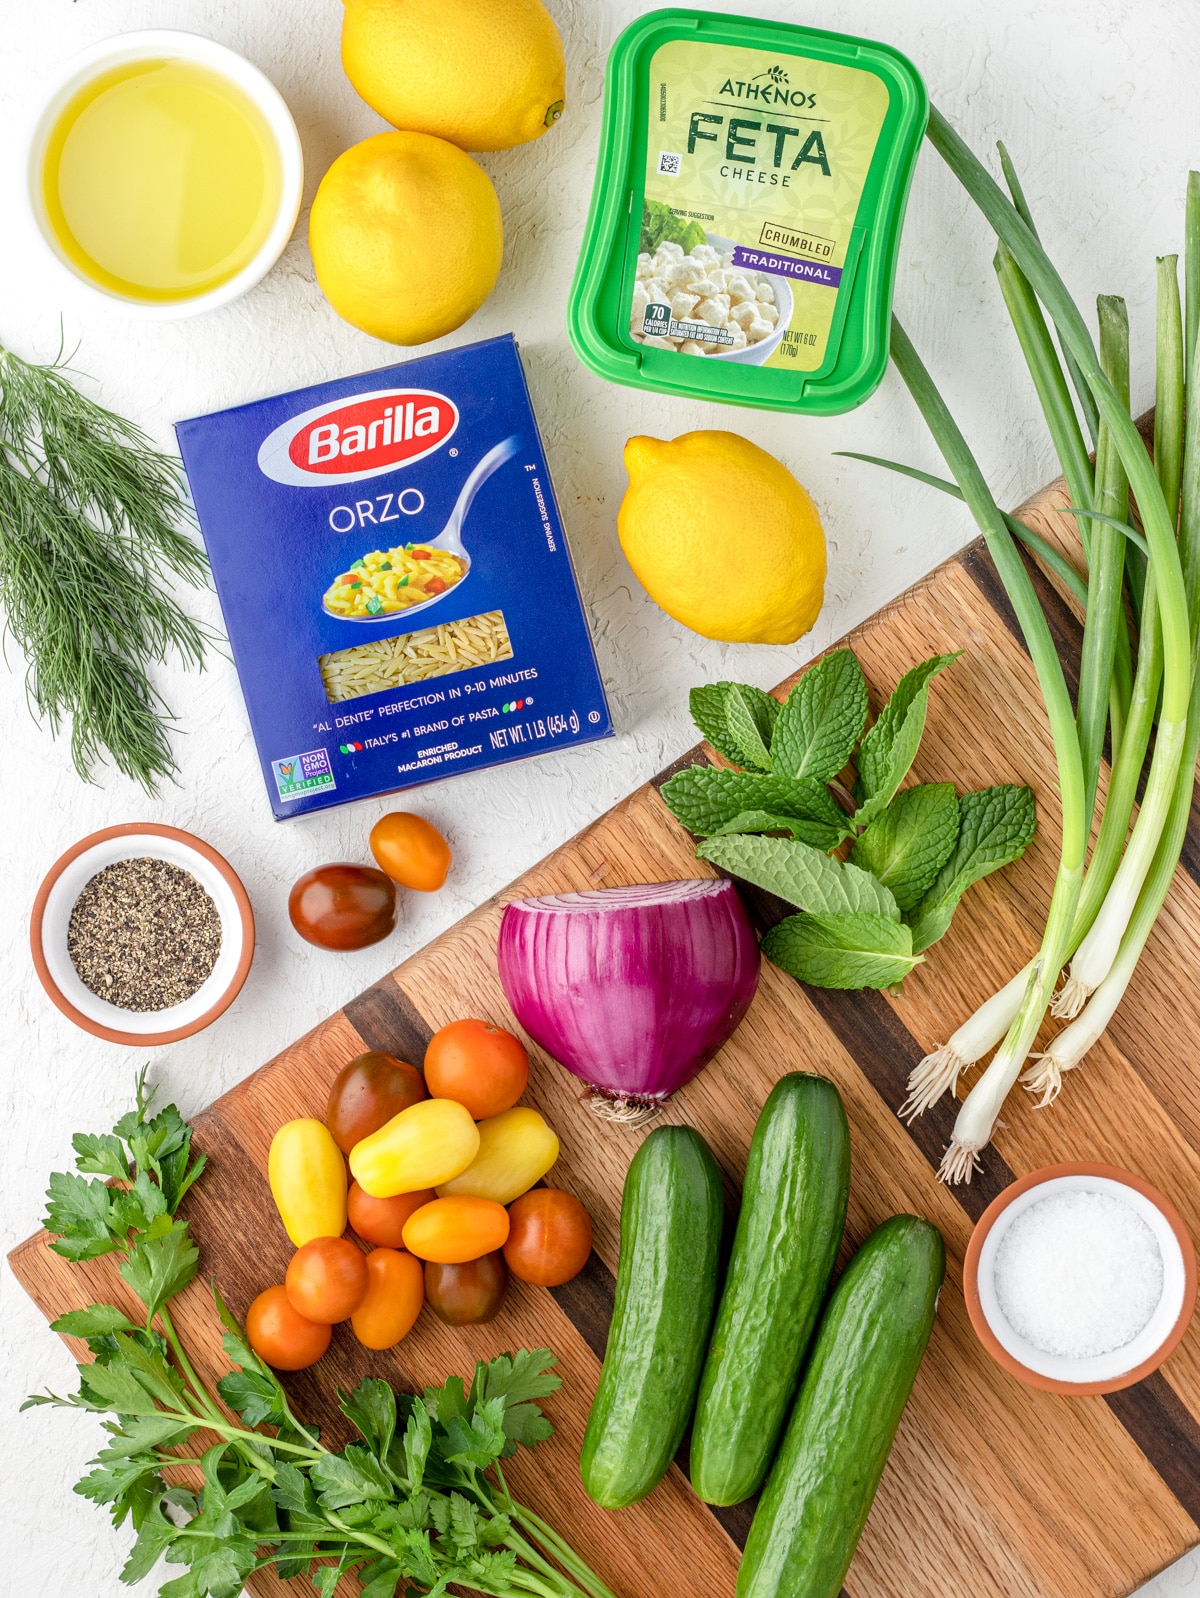 All the ingredients needed for Lemon Orzo Salad.